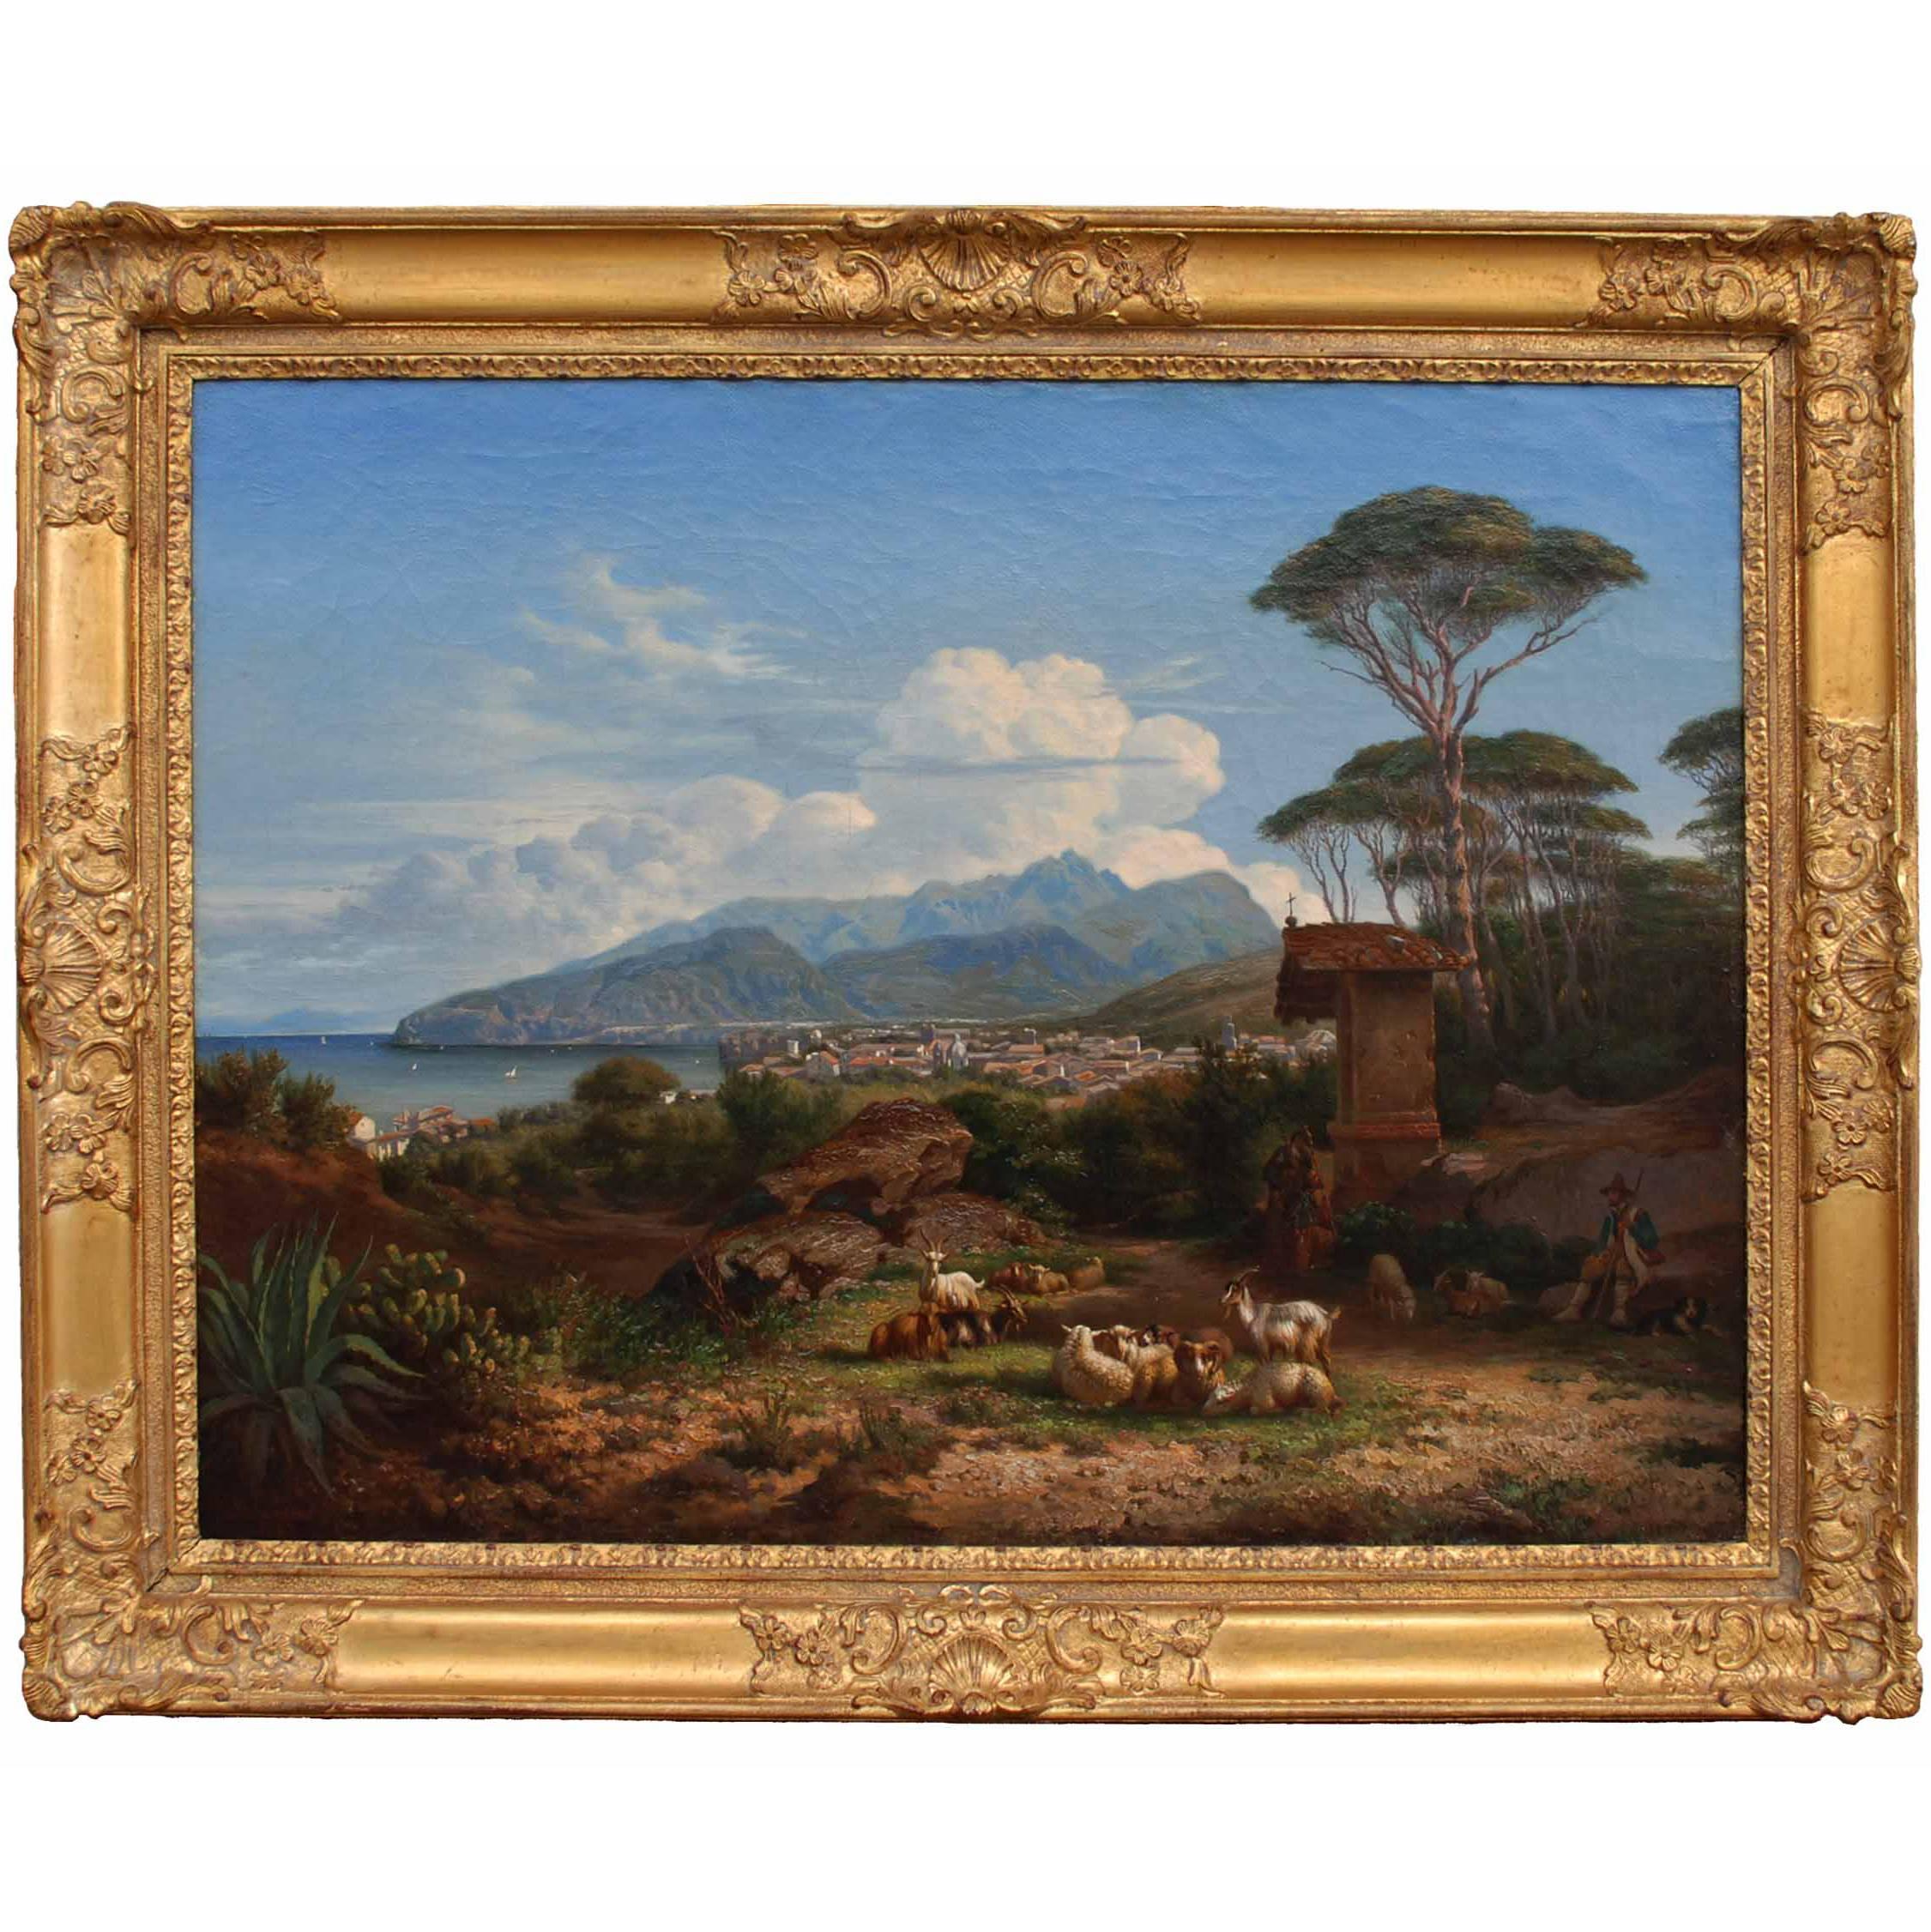 Shepherd and His Flock in an Italian Landscape, Oil on Canvas by Charles Coumont